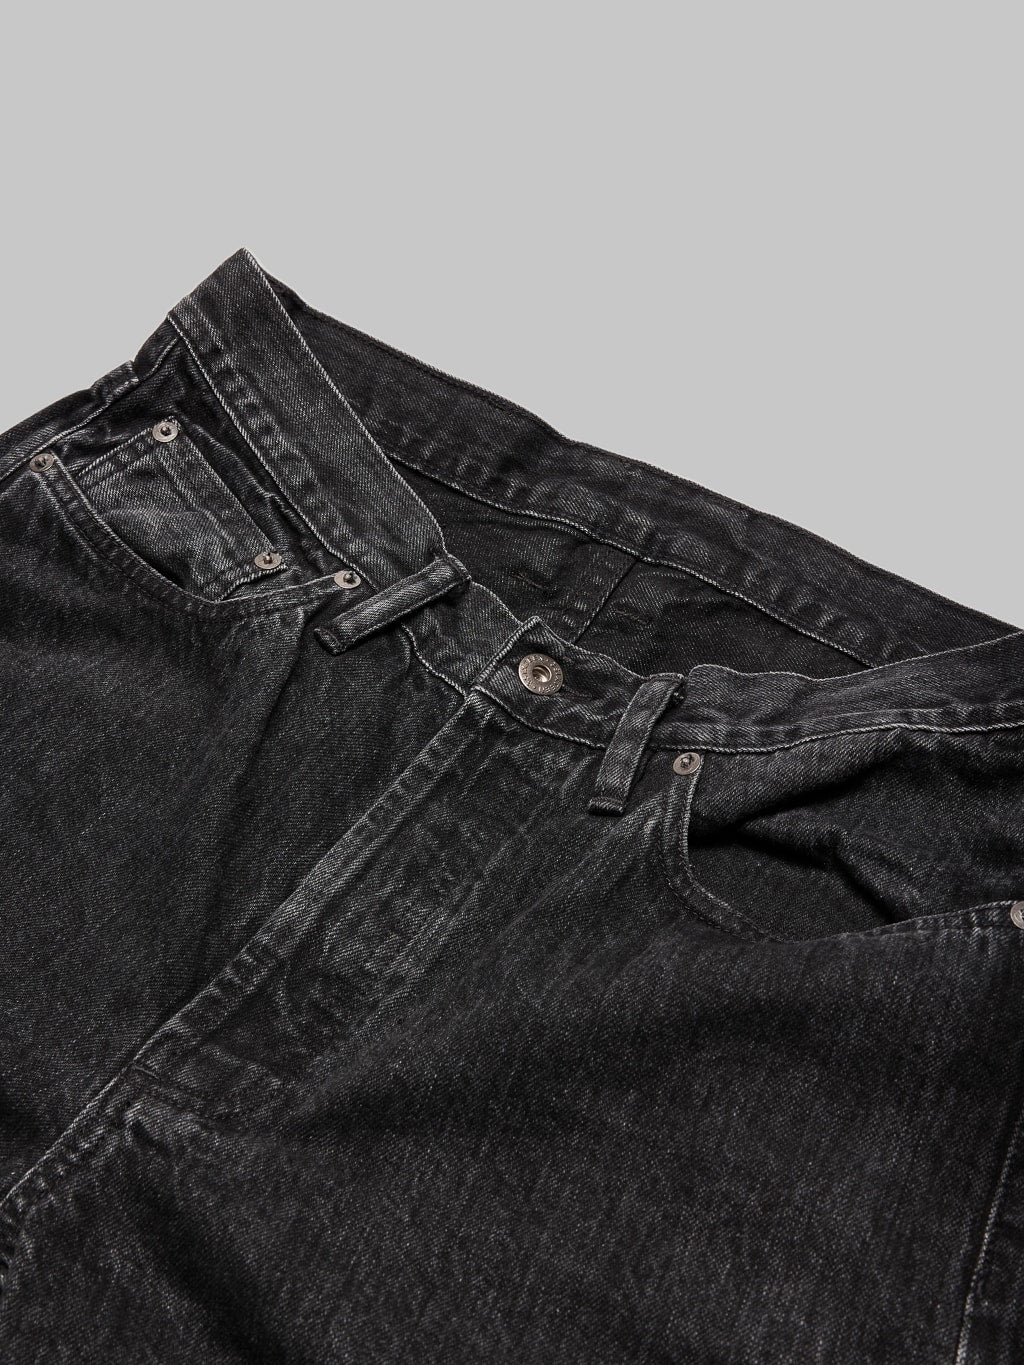 3sixteen CT 220x Classic Tapered Stonewashed Double Black front pockets